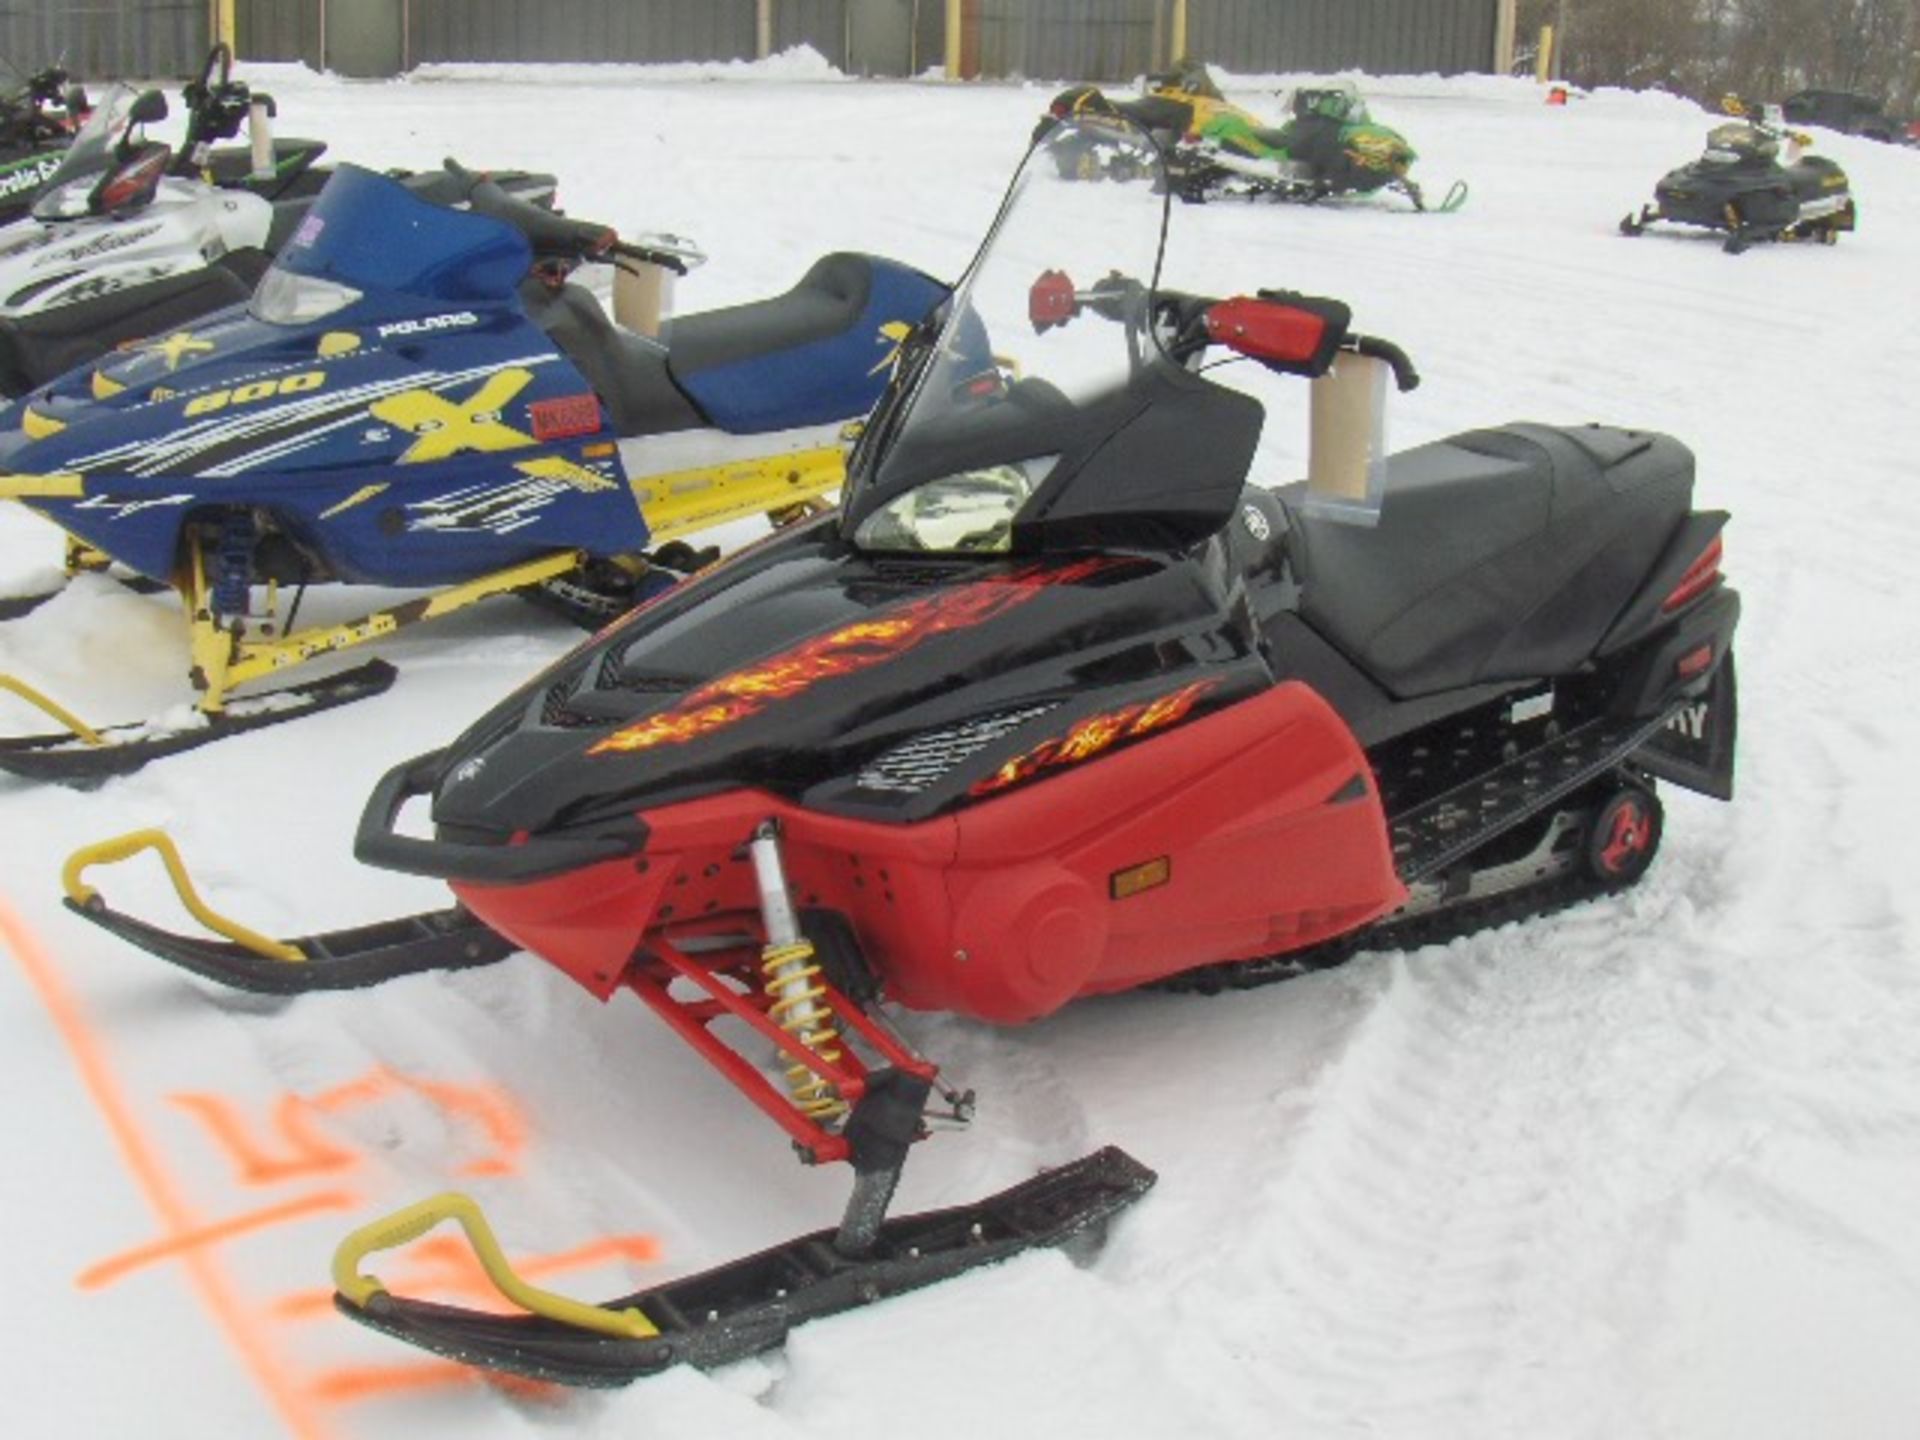 2007 YAMAHA NYTRO  JYE8GH0087A003918 snowmobile, owner started at time of auction check in, electric